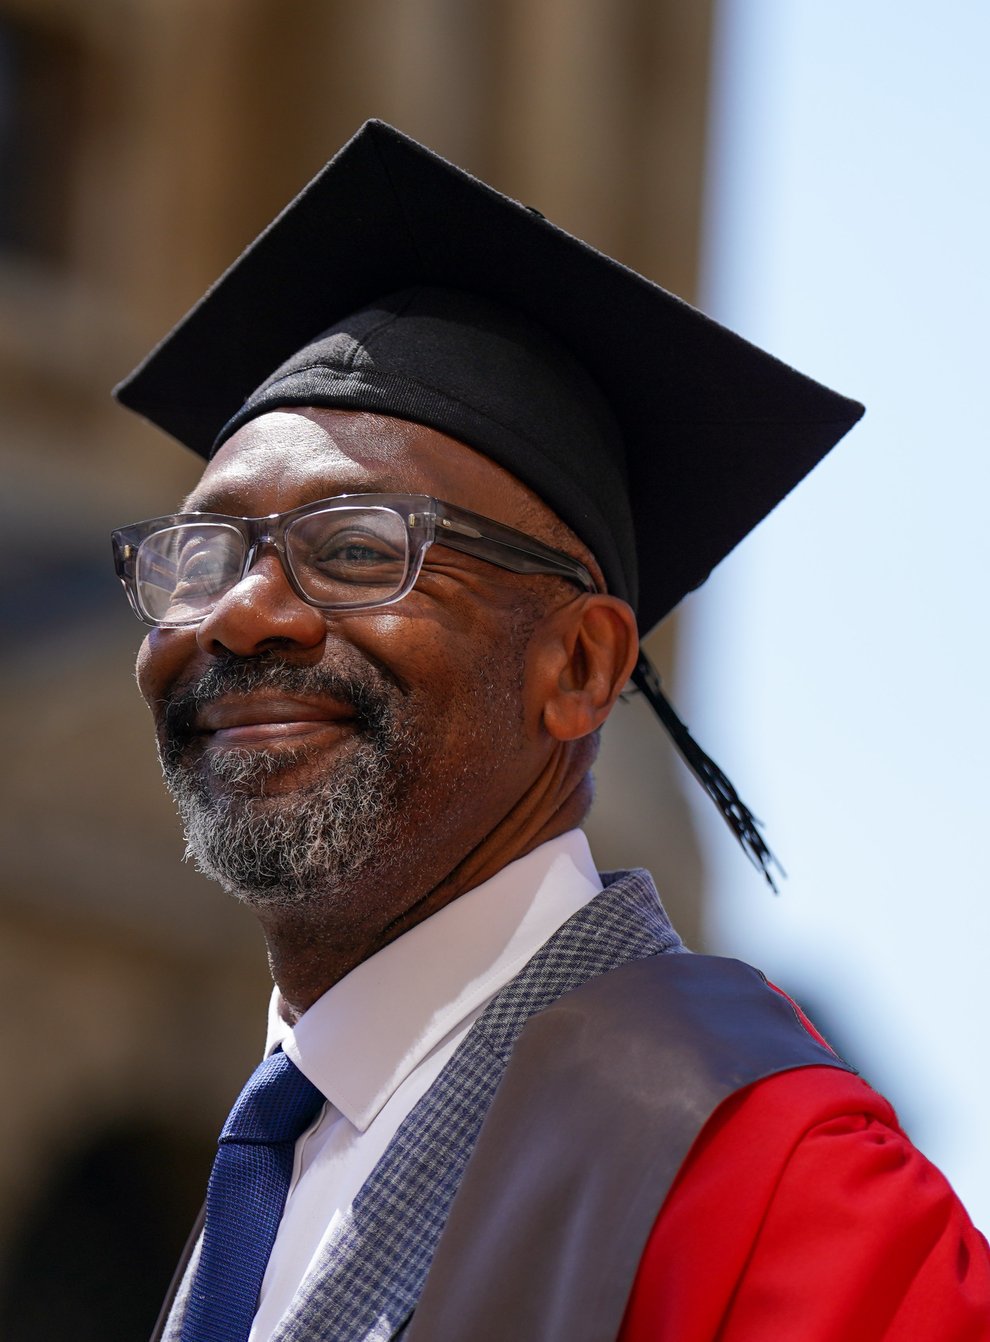 Sir Lenny Henry walks in a procession ahead of receiving an honorary degree from Oxford University at a ceremony at Sheldonian Theatre, Oxford. (Jacob King/PA)